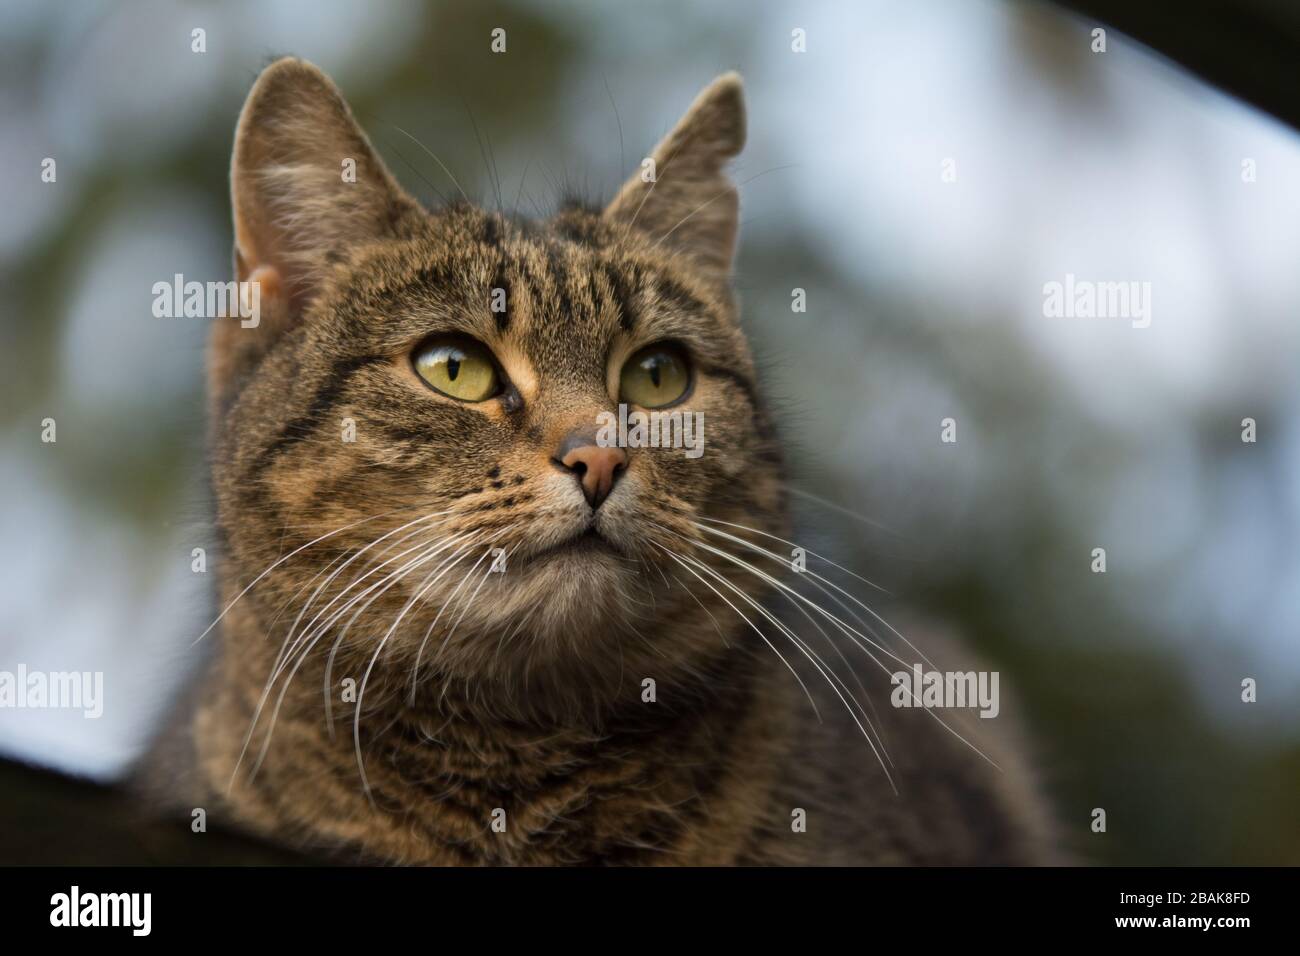 Close-up of a gray tabby cat with incision scar on her ear looking at something - copy space Stock Photo